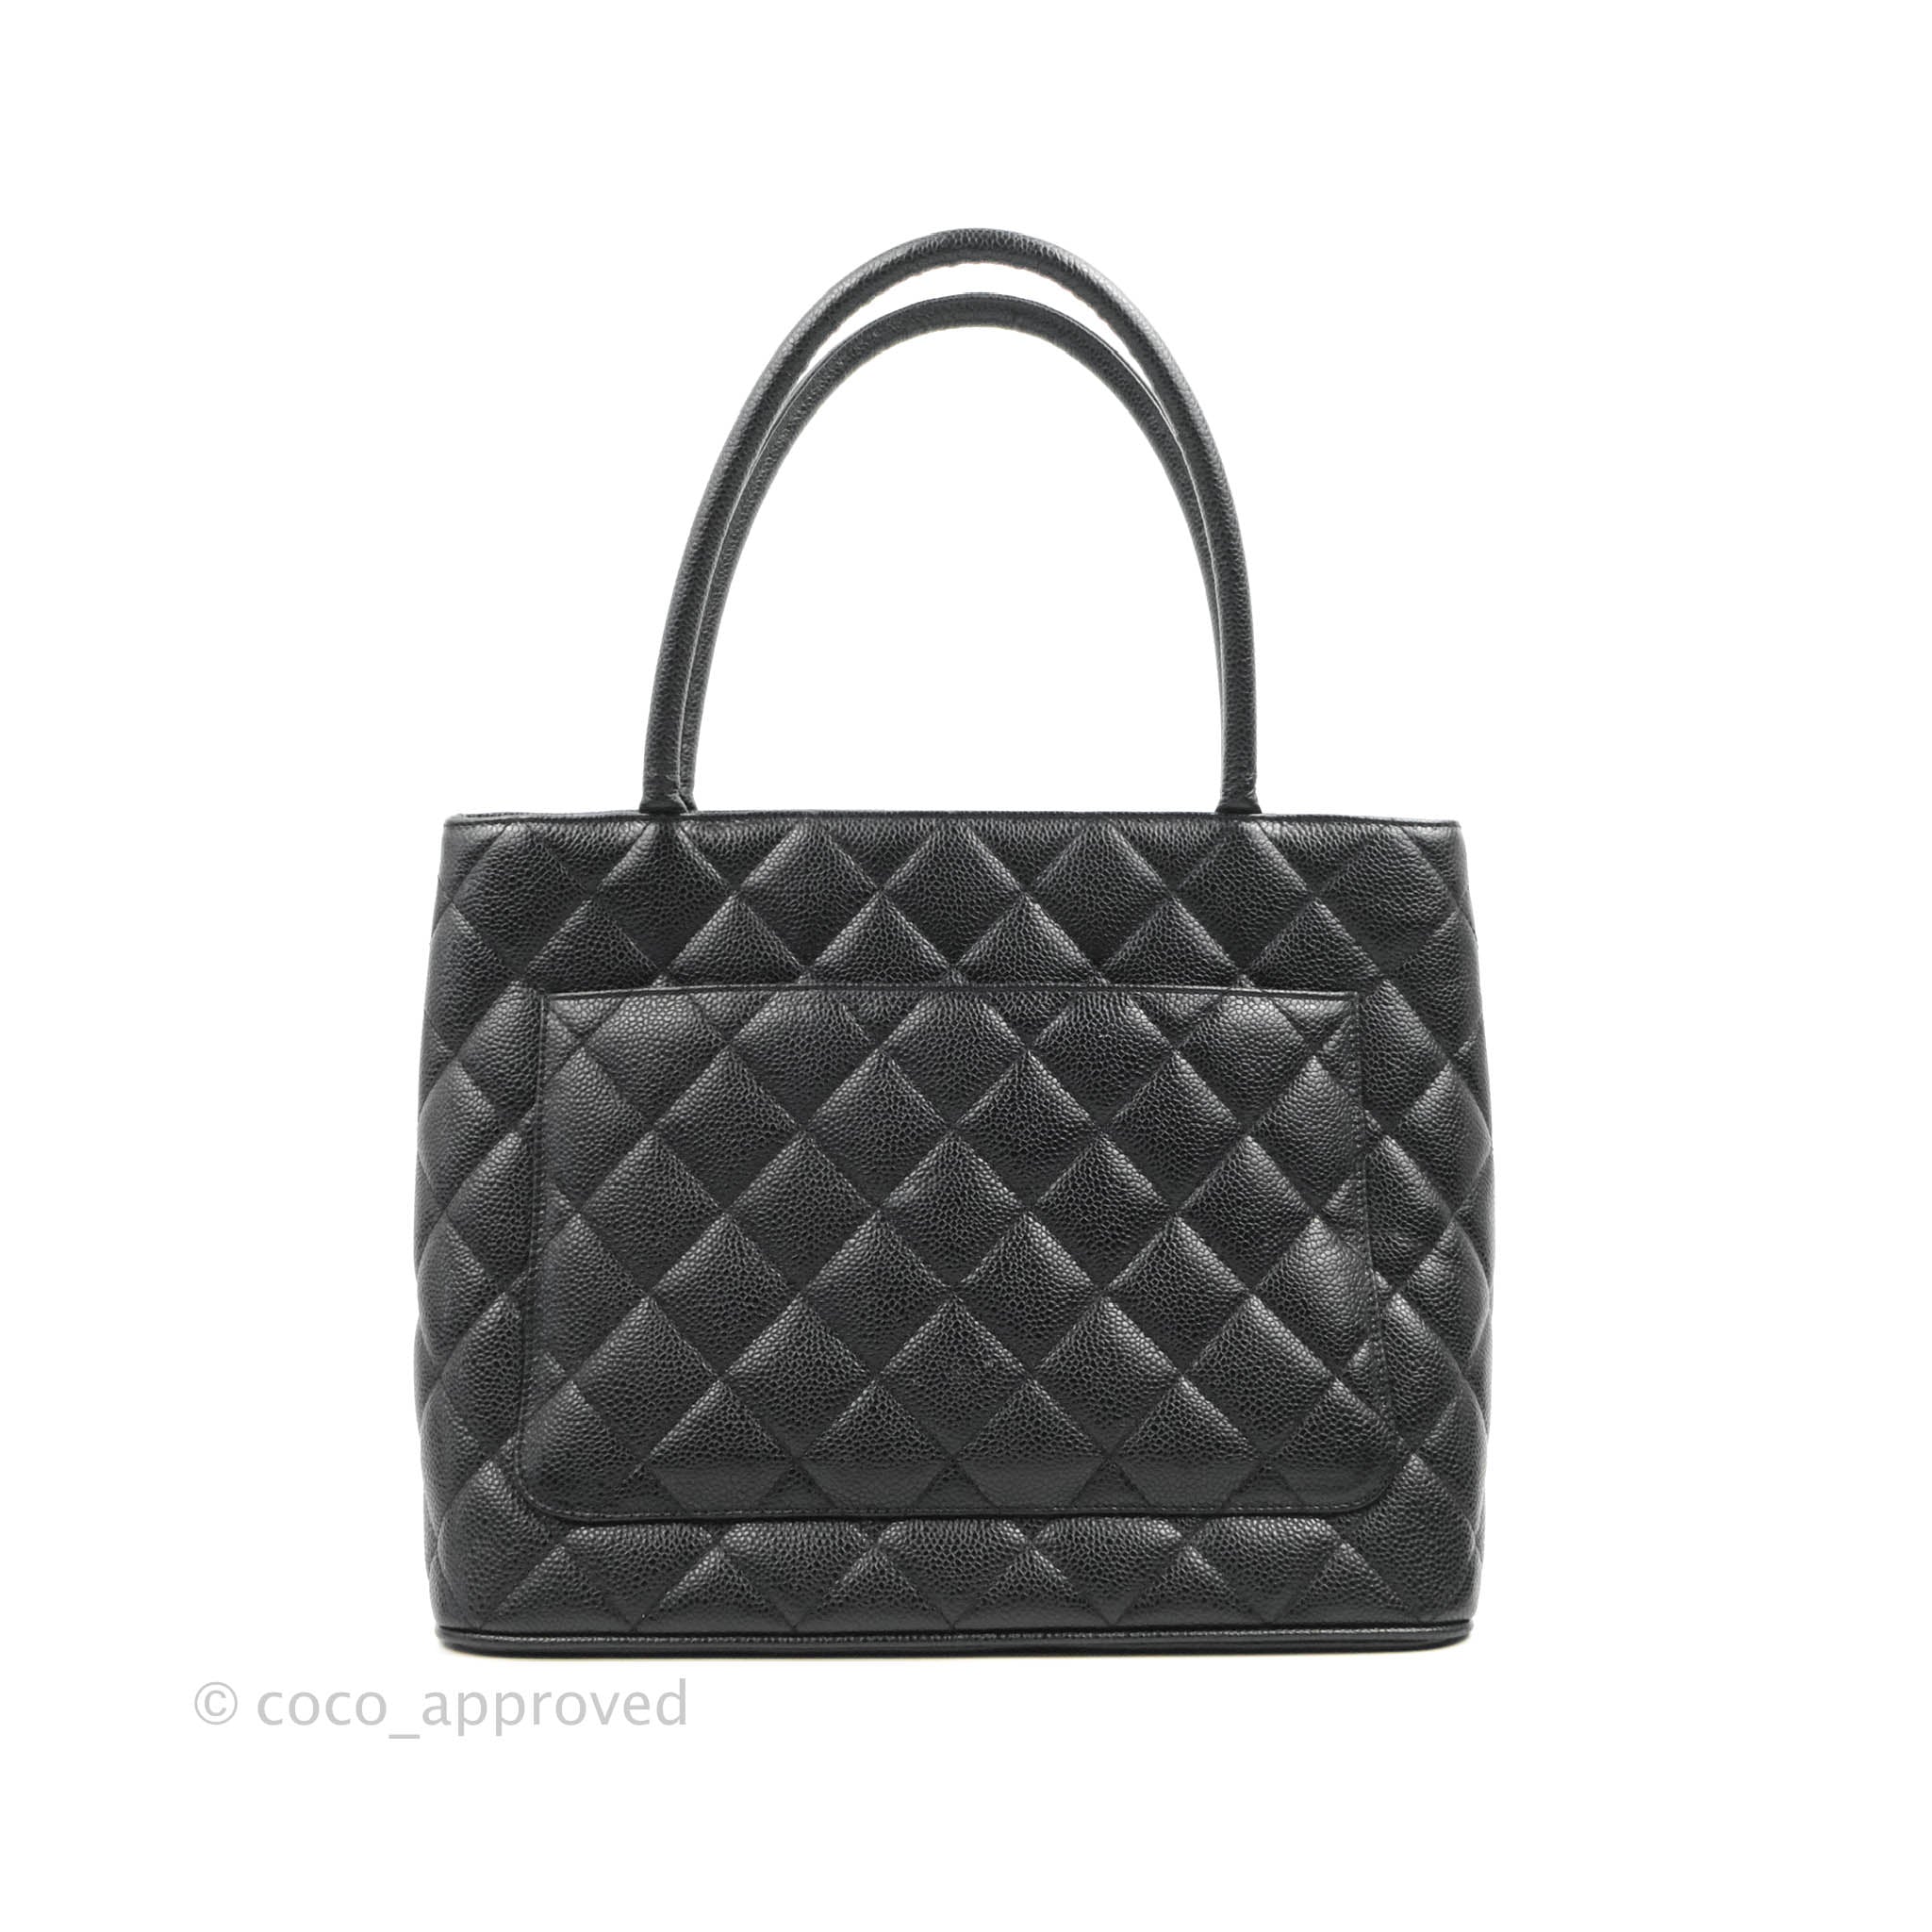 Sold at Auction: A Chanel quilted black satin evening bag, 2000-2002